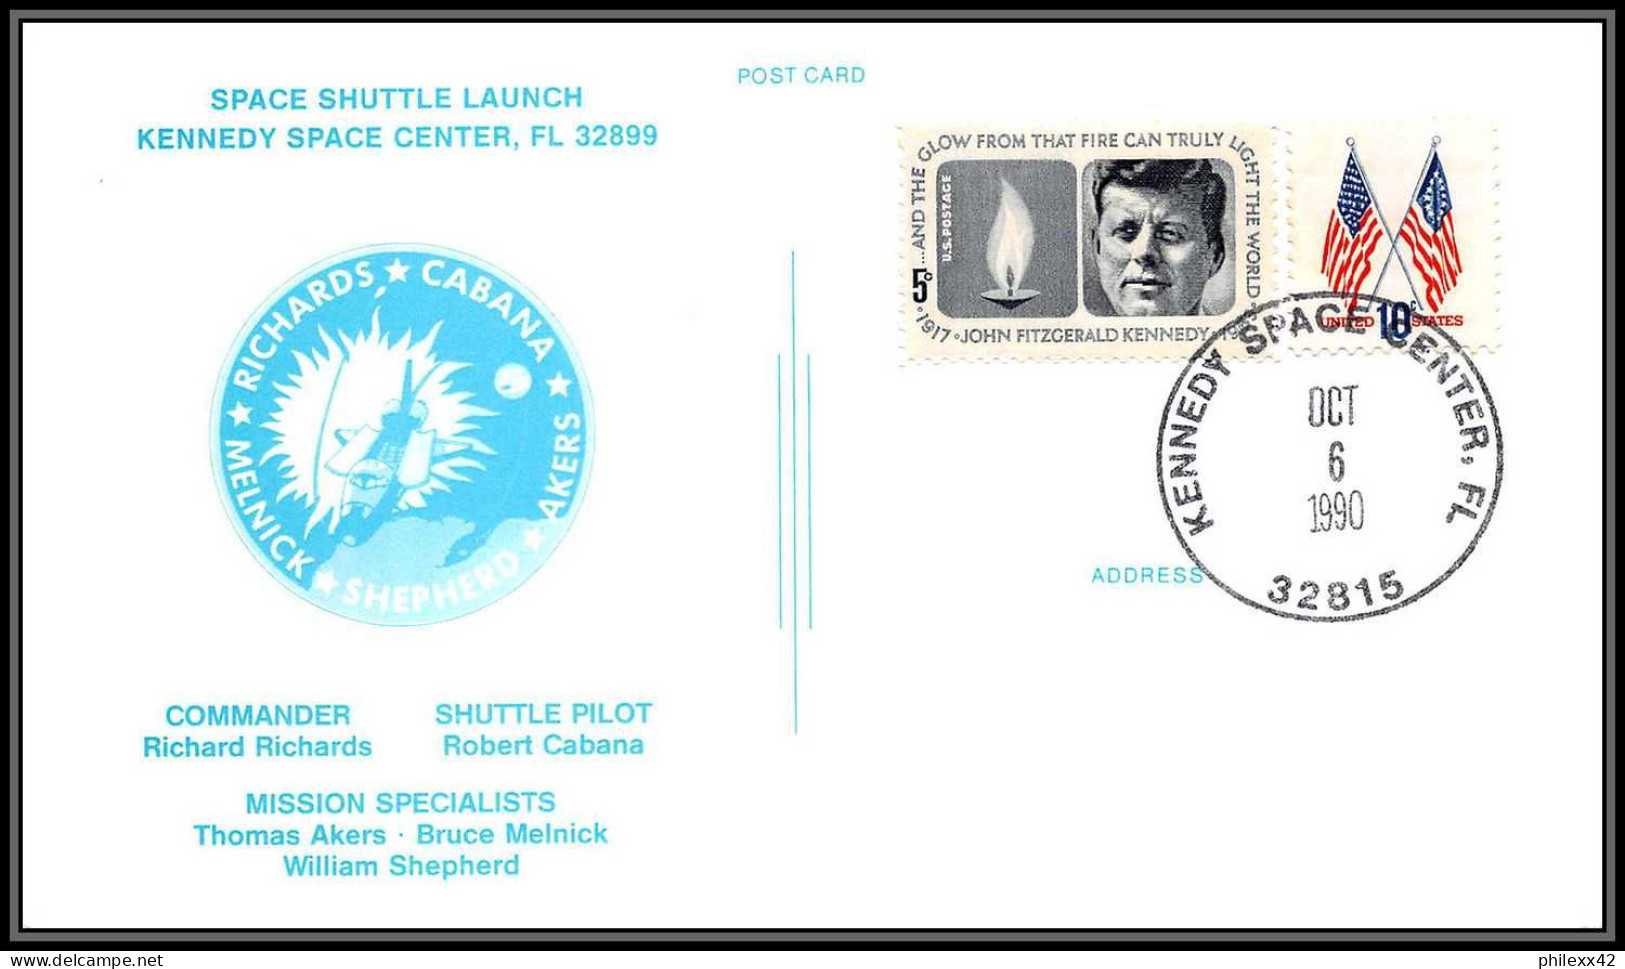 1843 Espace (space Raumfahrt) Lettre (cover Briefe) USA Start STS 41 Discovery Shuttle (navette) 6/10/1990 - Stati Uniti